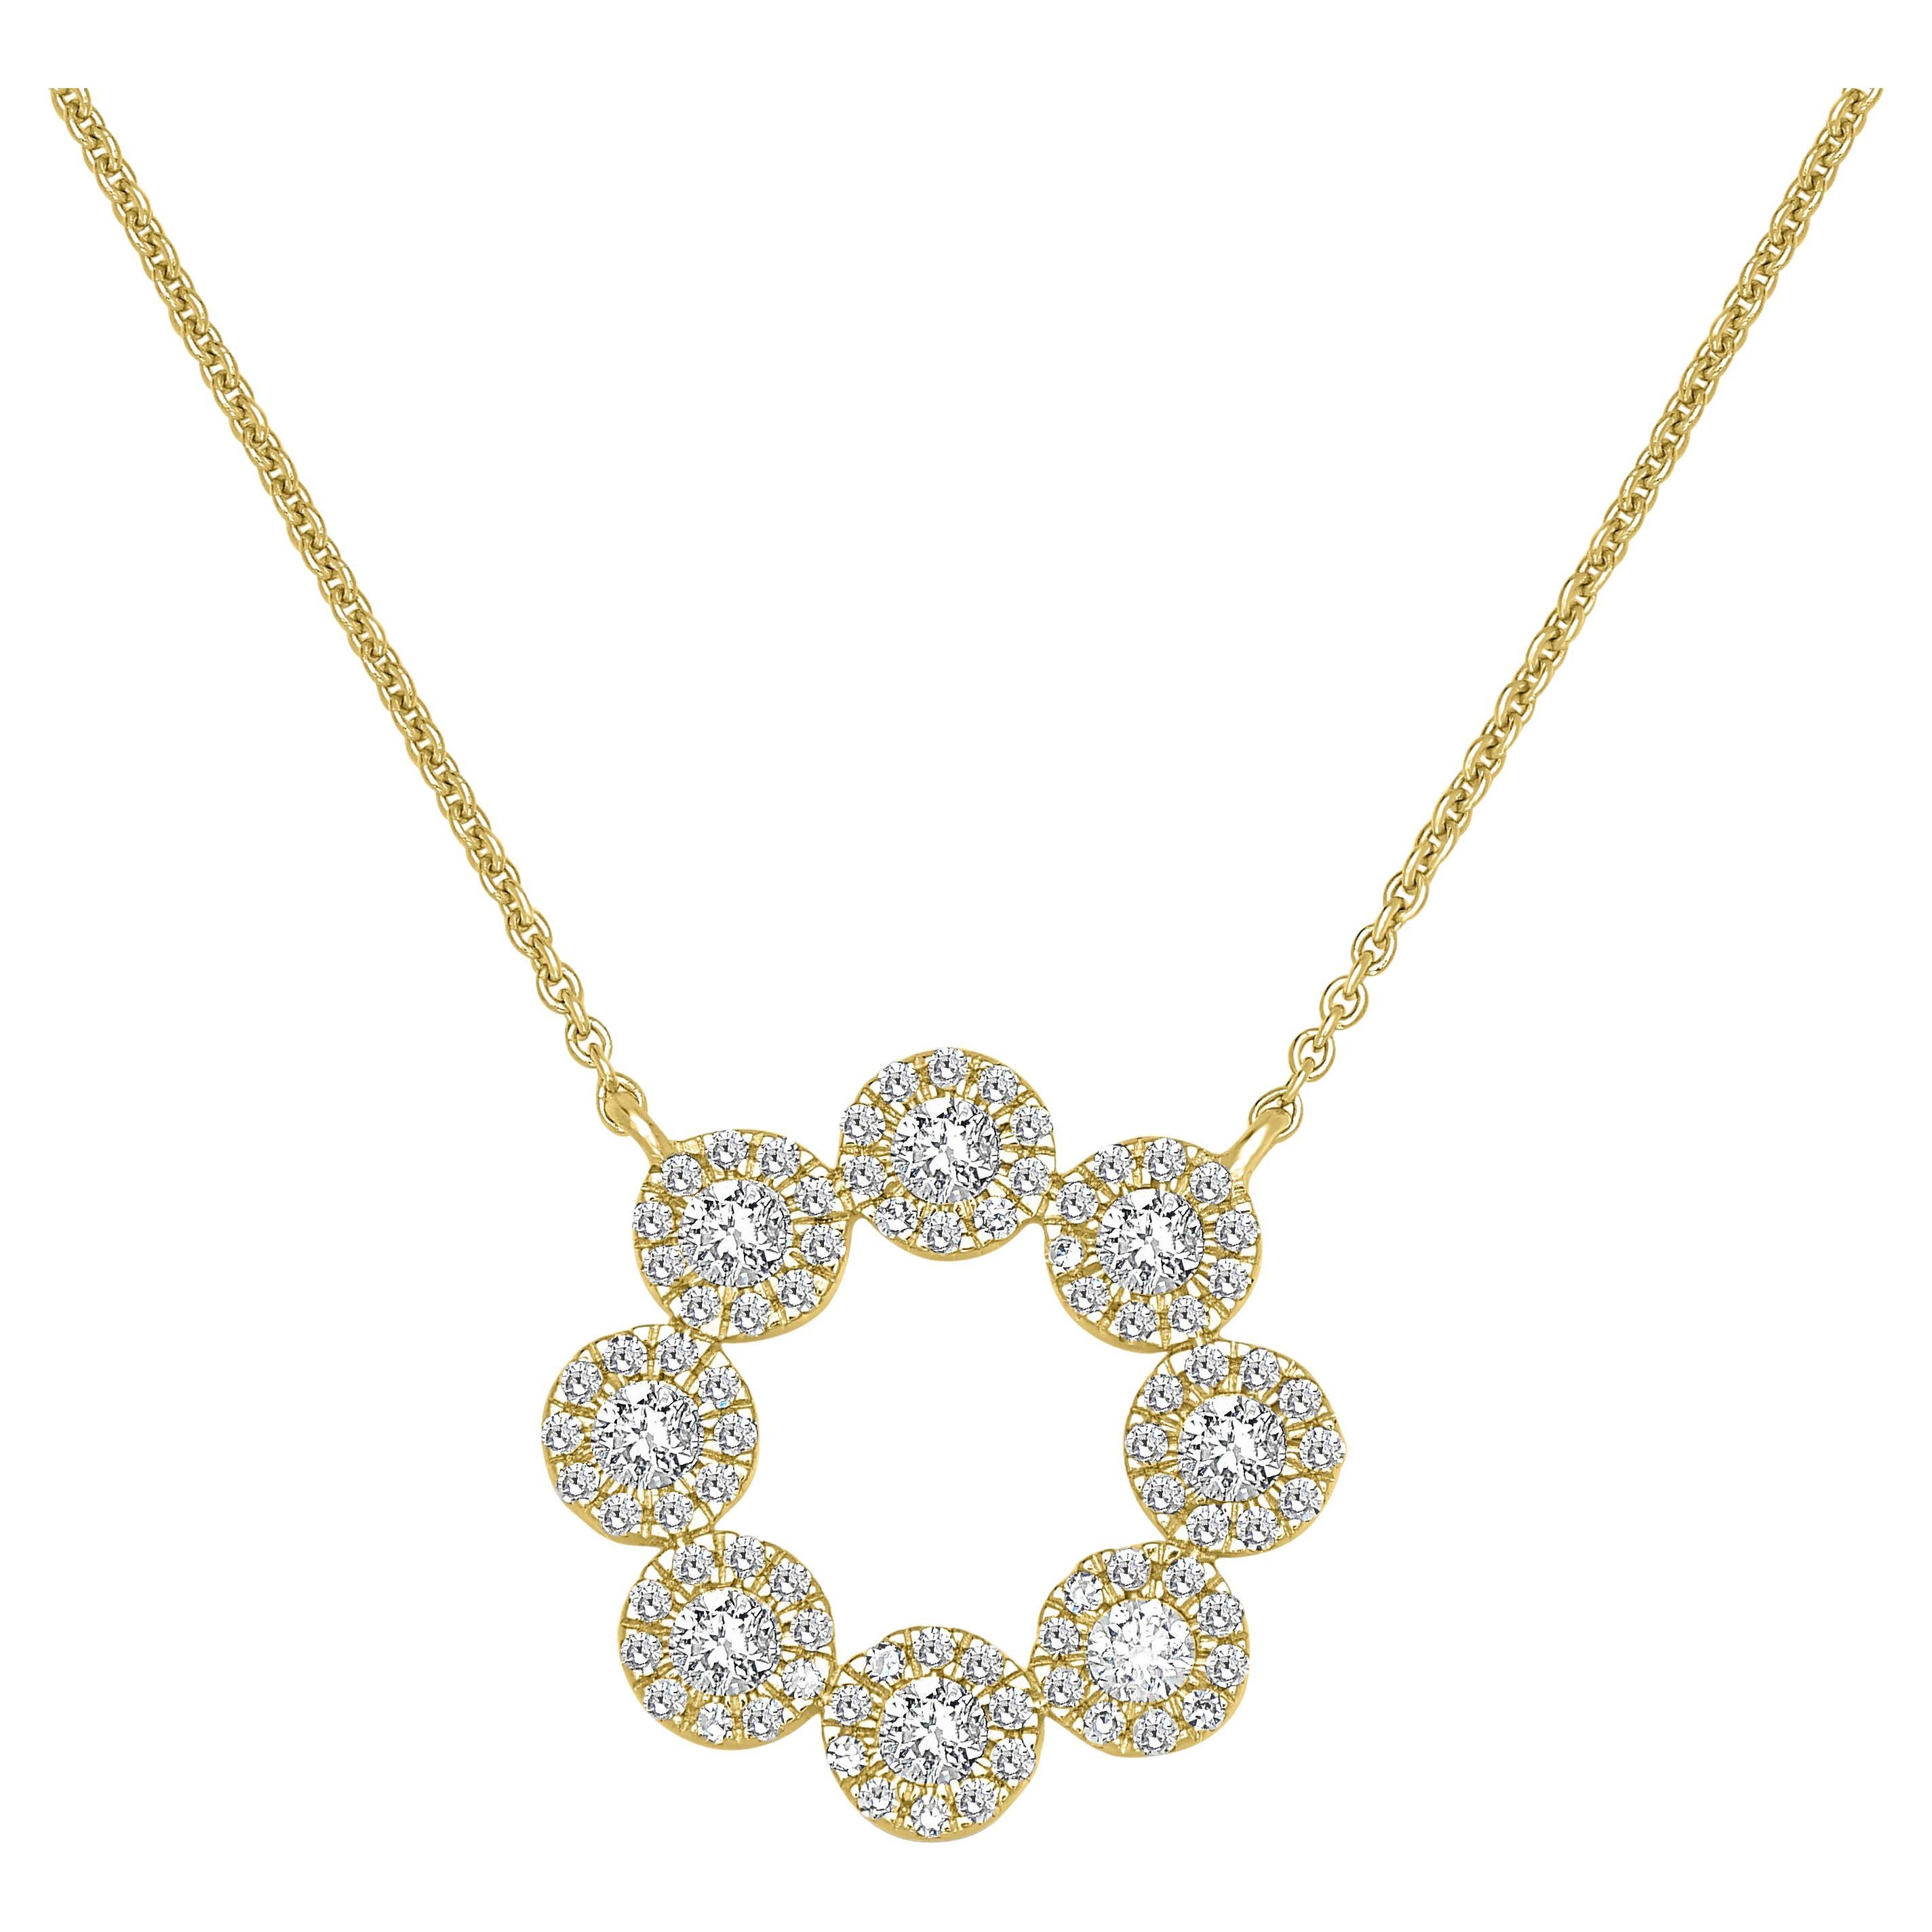 Luxle 0.52 Cttw. Multiple Circles Diamond Pendant Necklace in 14k Yellow Gold For Sale